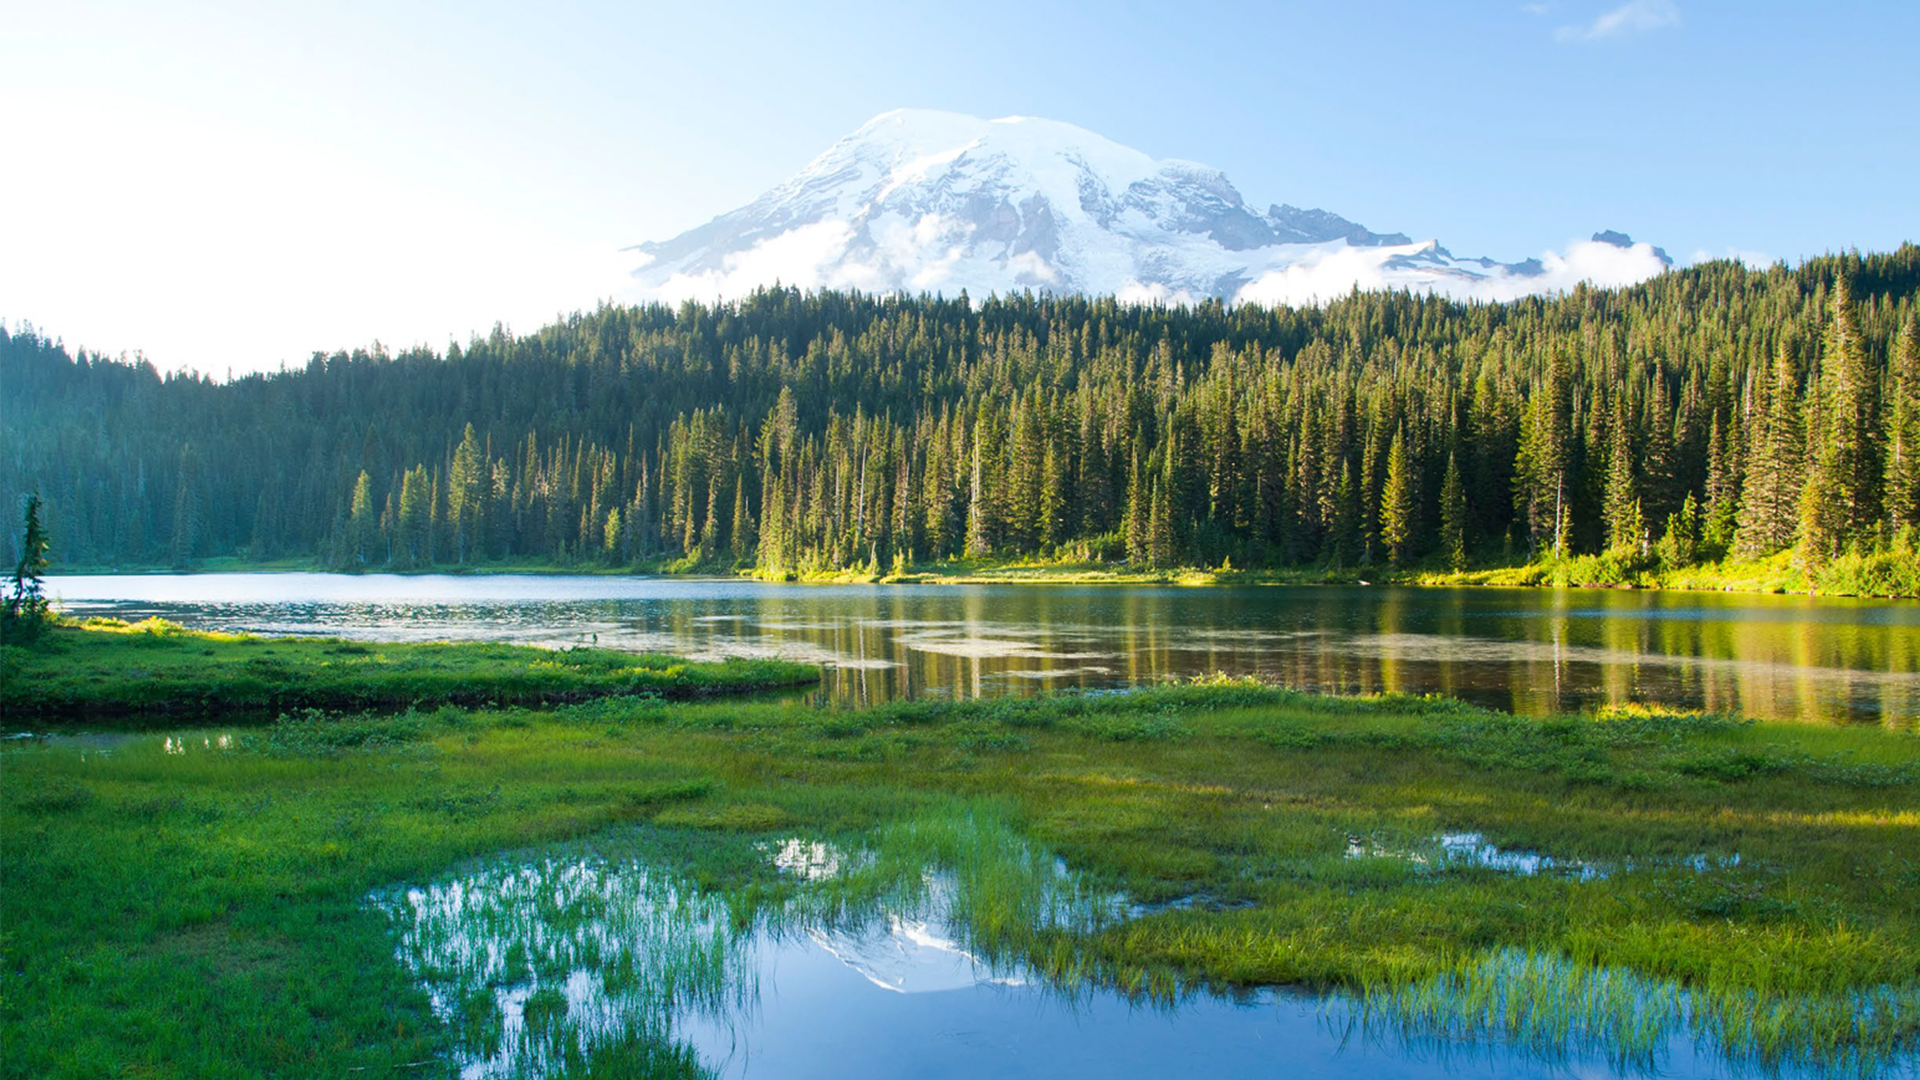 An image of a lake in the Pacific Northwest with trees and a snowy mountain in the background.